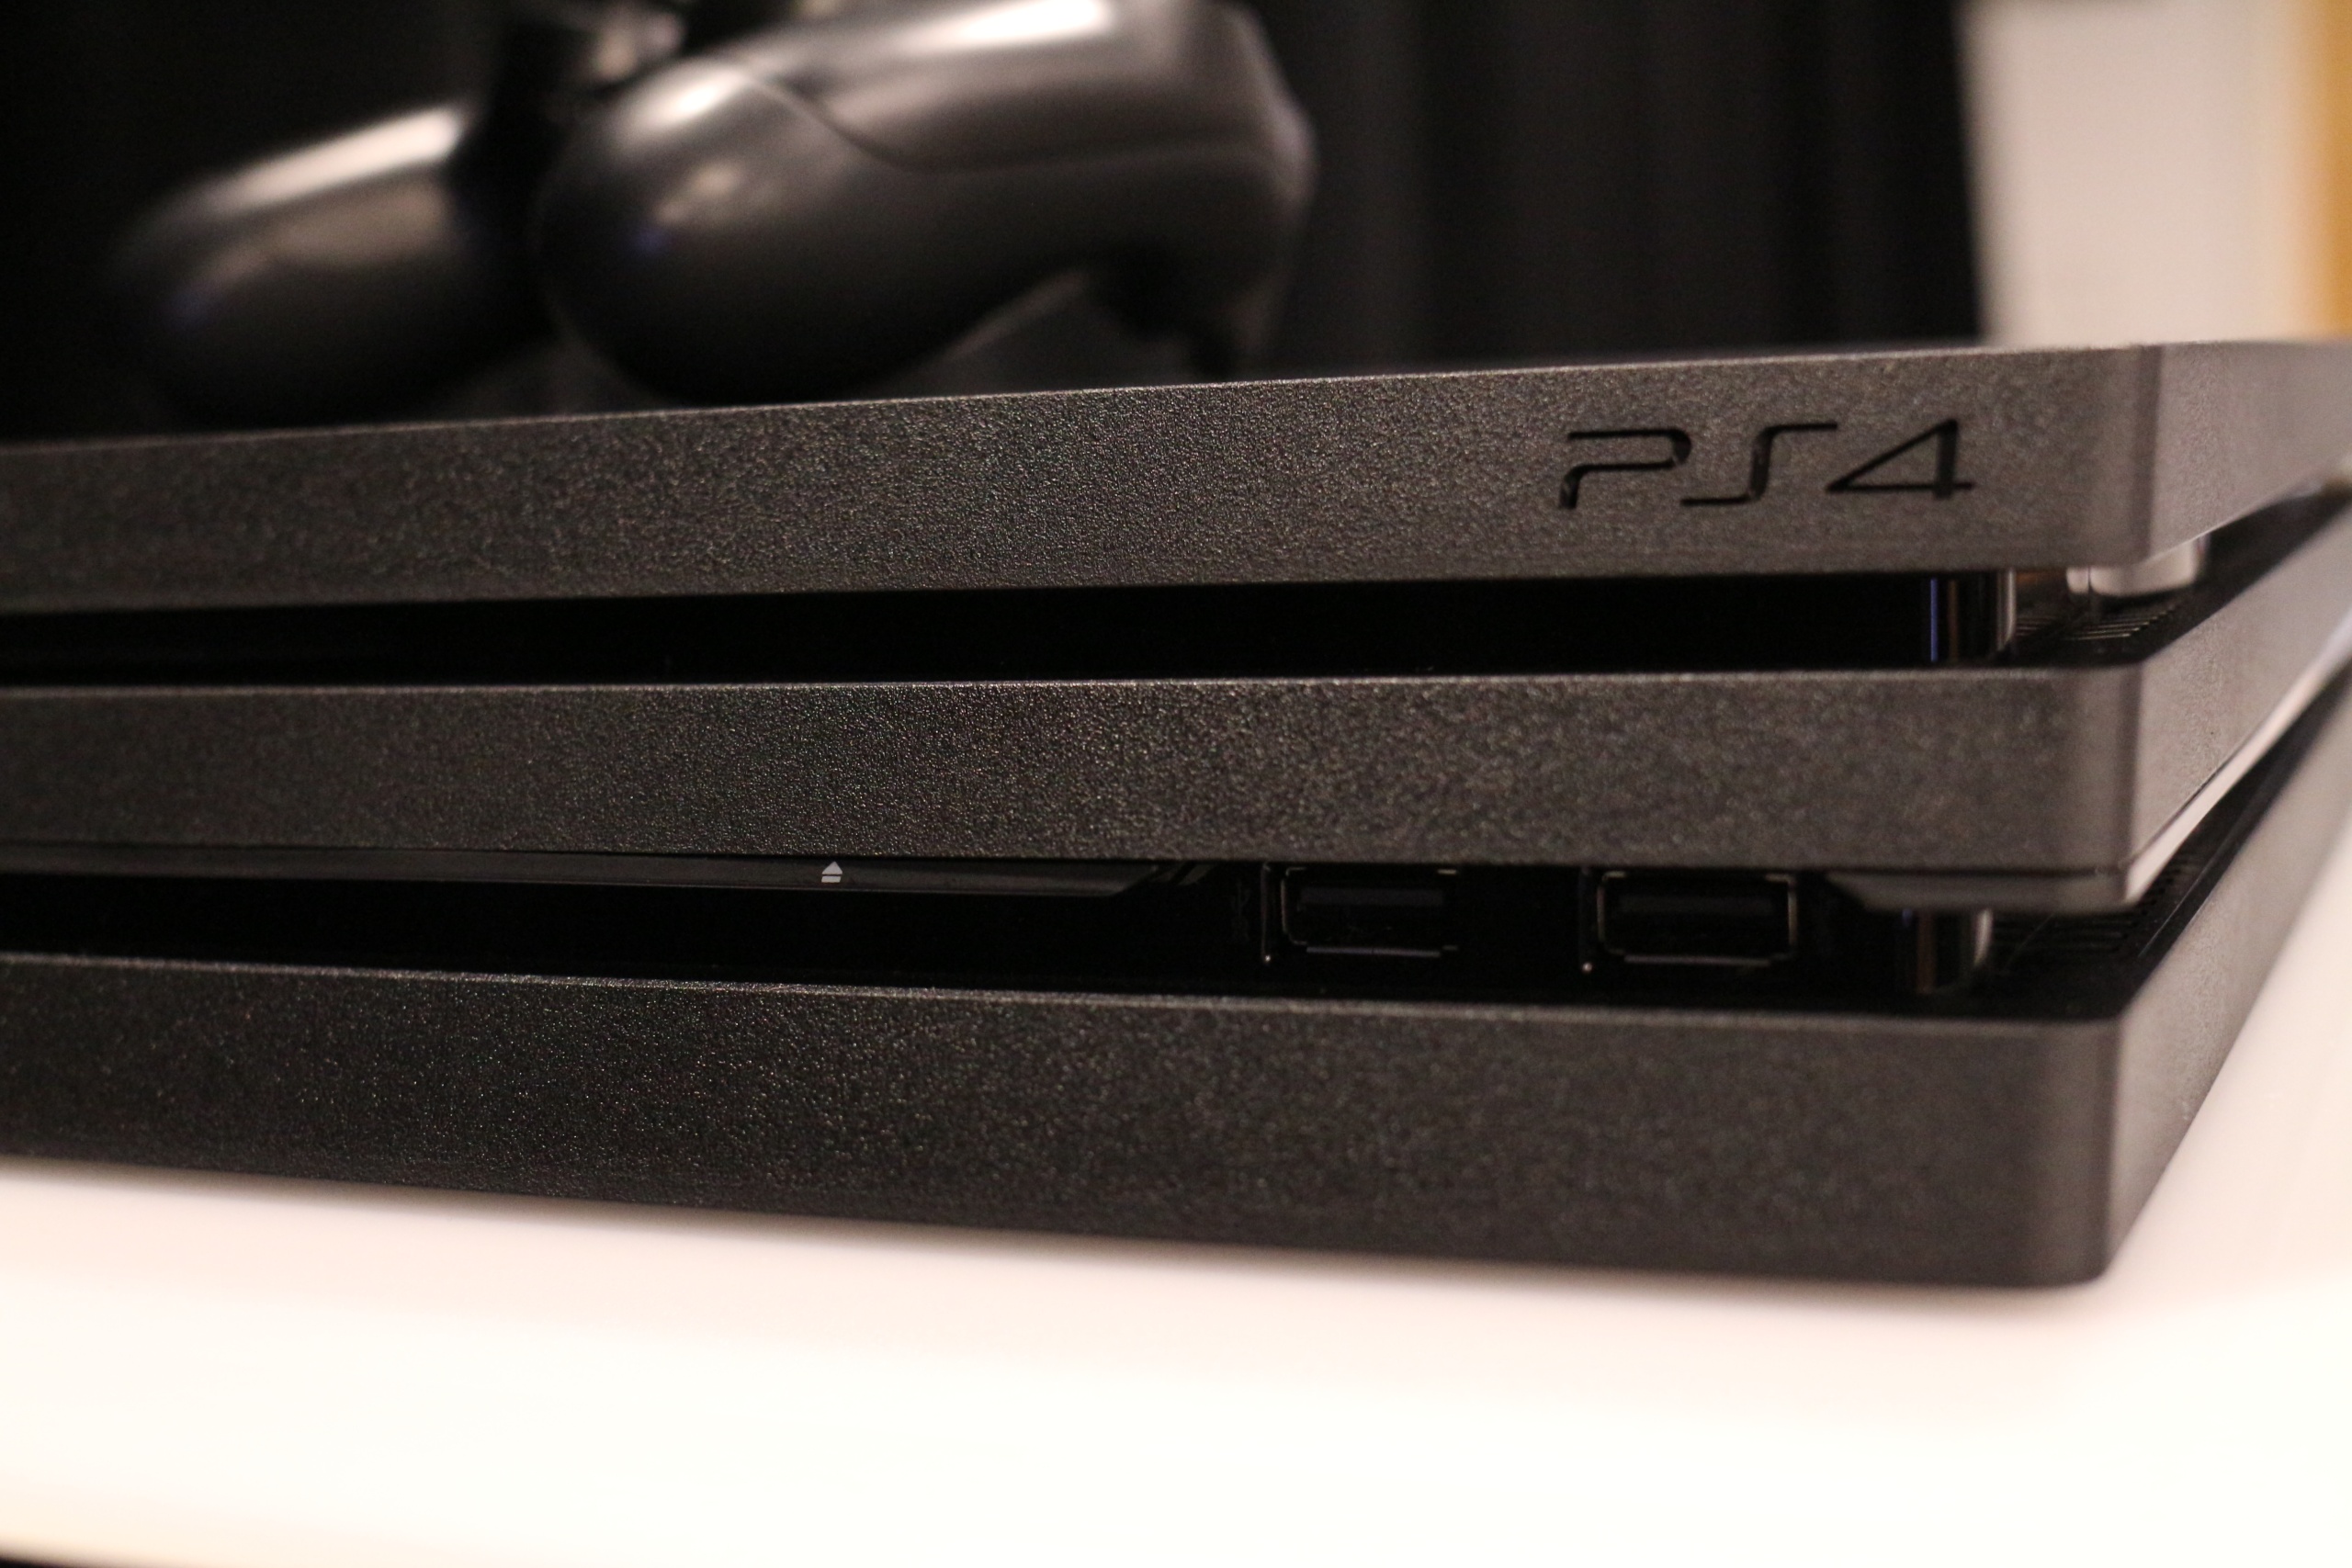 Sony PlayStation Pro review: Should you buy a PS4 Pro? It's complicated  CNET